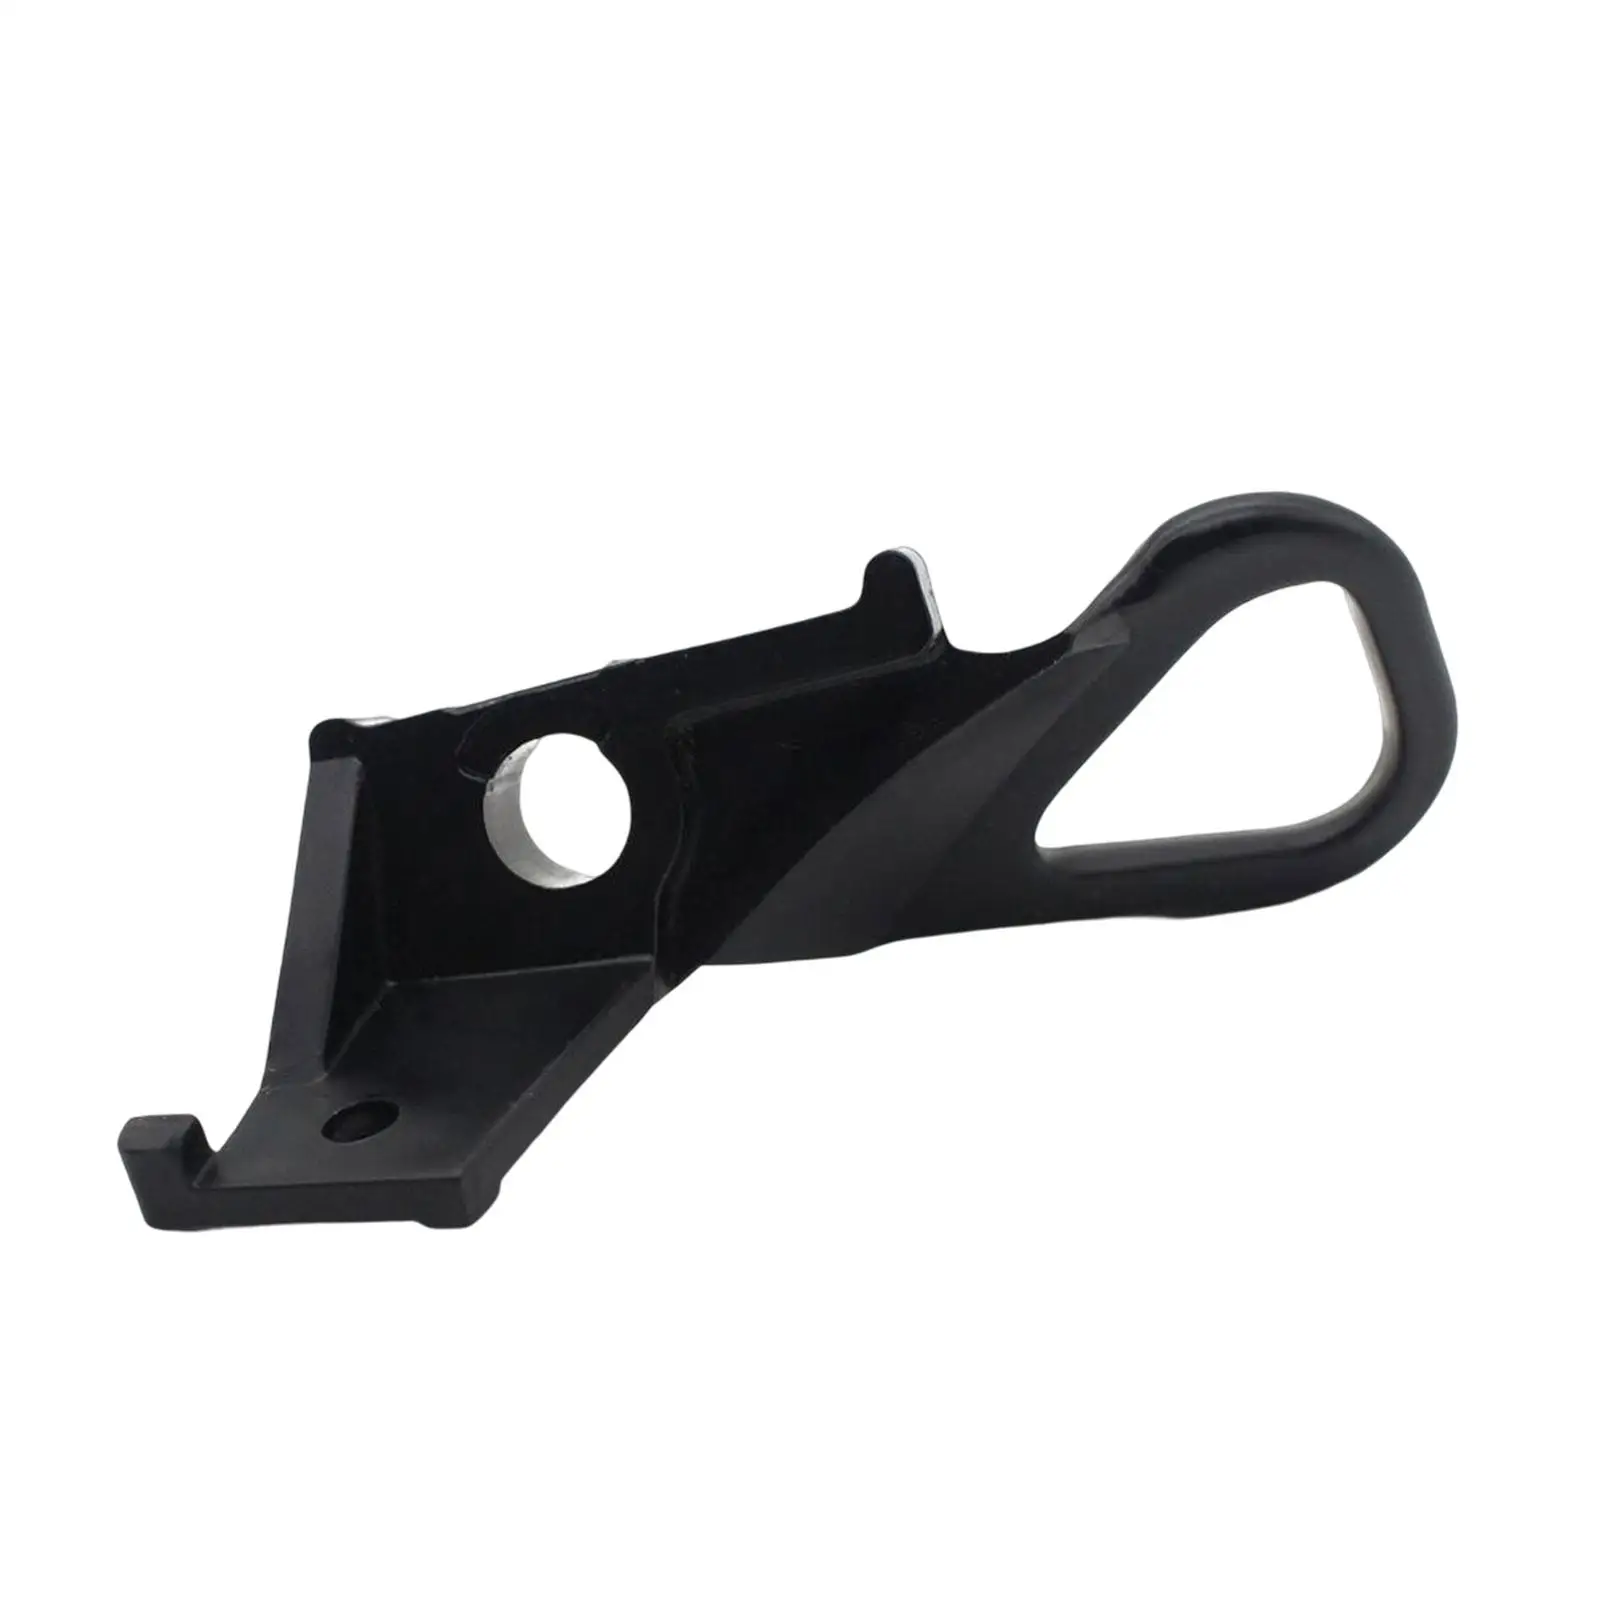 Black Oil Cup Bracket Easy Installation Professional Replacement Aluminum Alloy Oil Cup Bracket for Yamaha Yzf R1 2004-2014